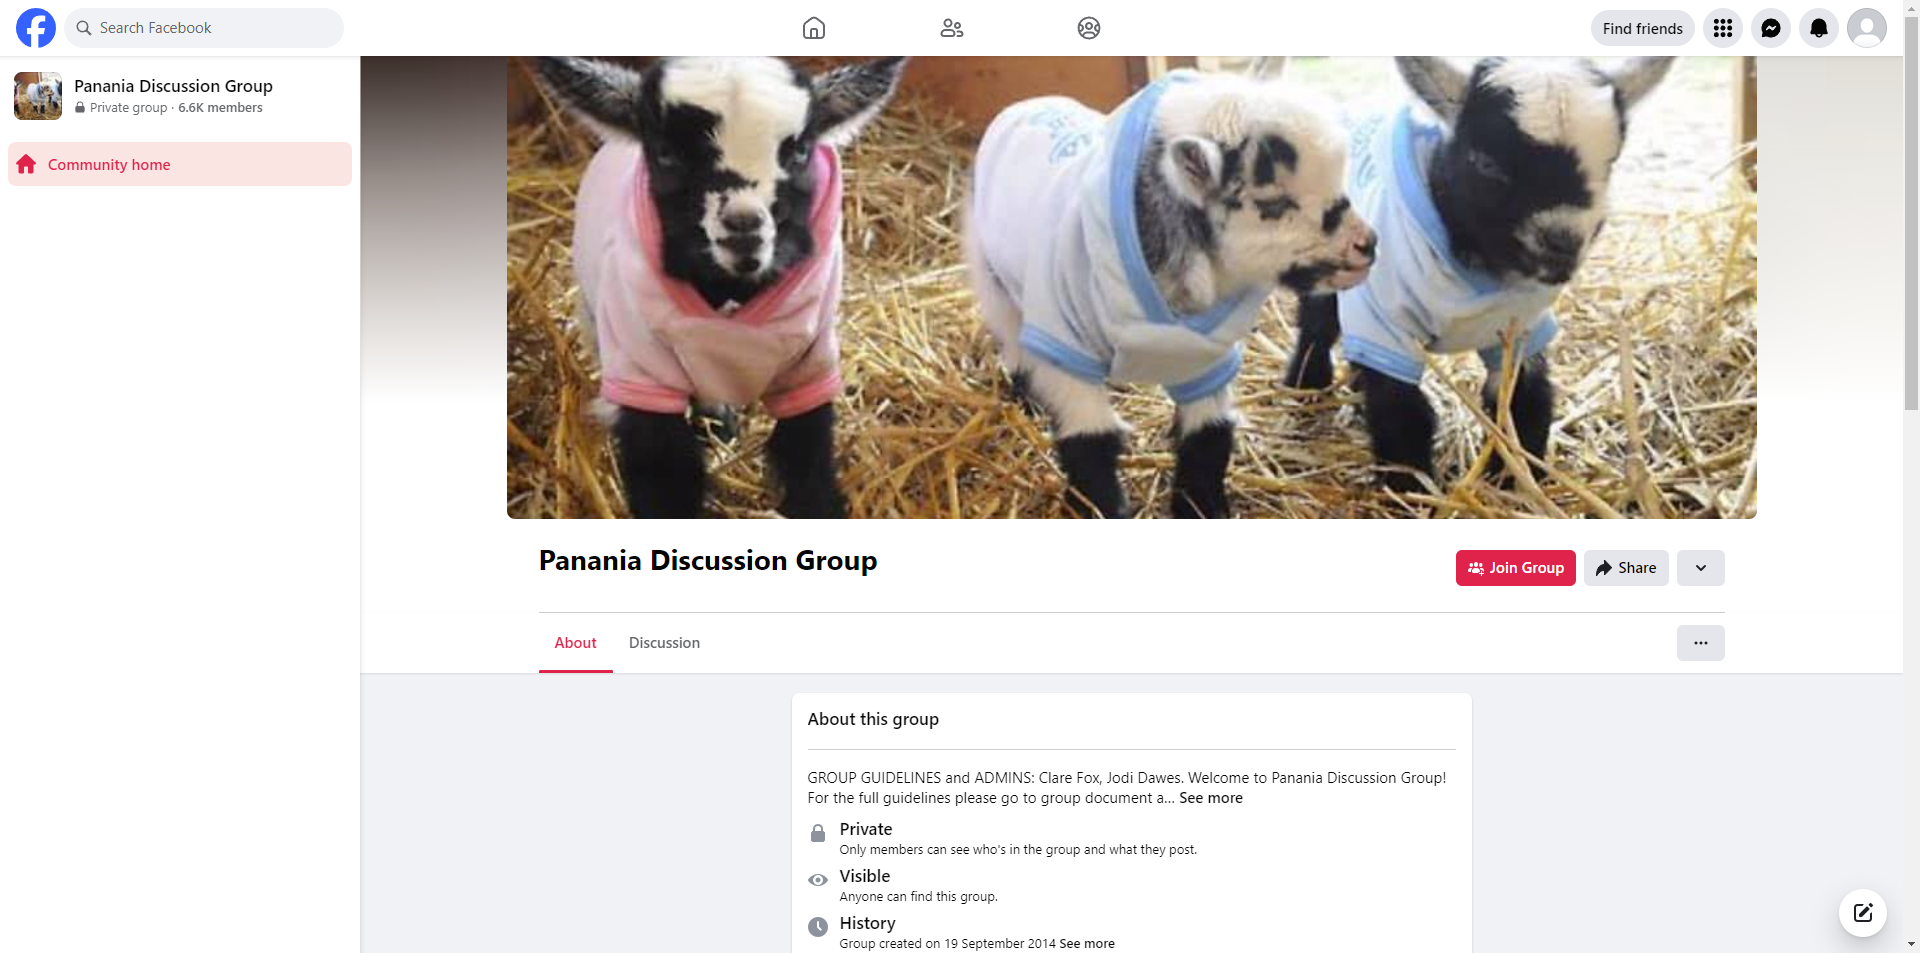 Panania Discussion Group